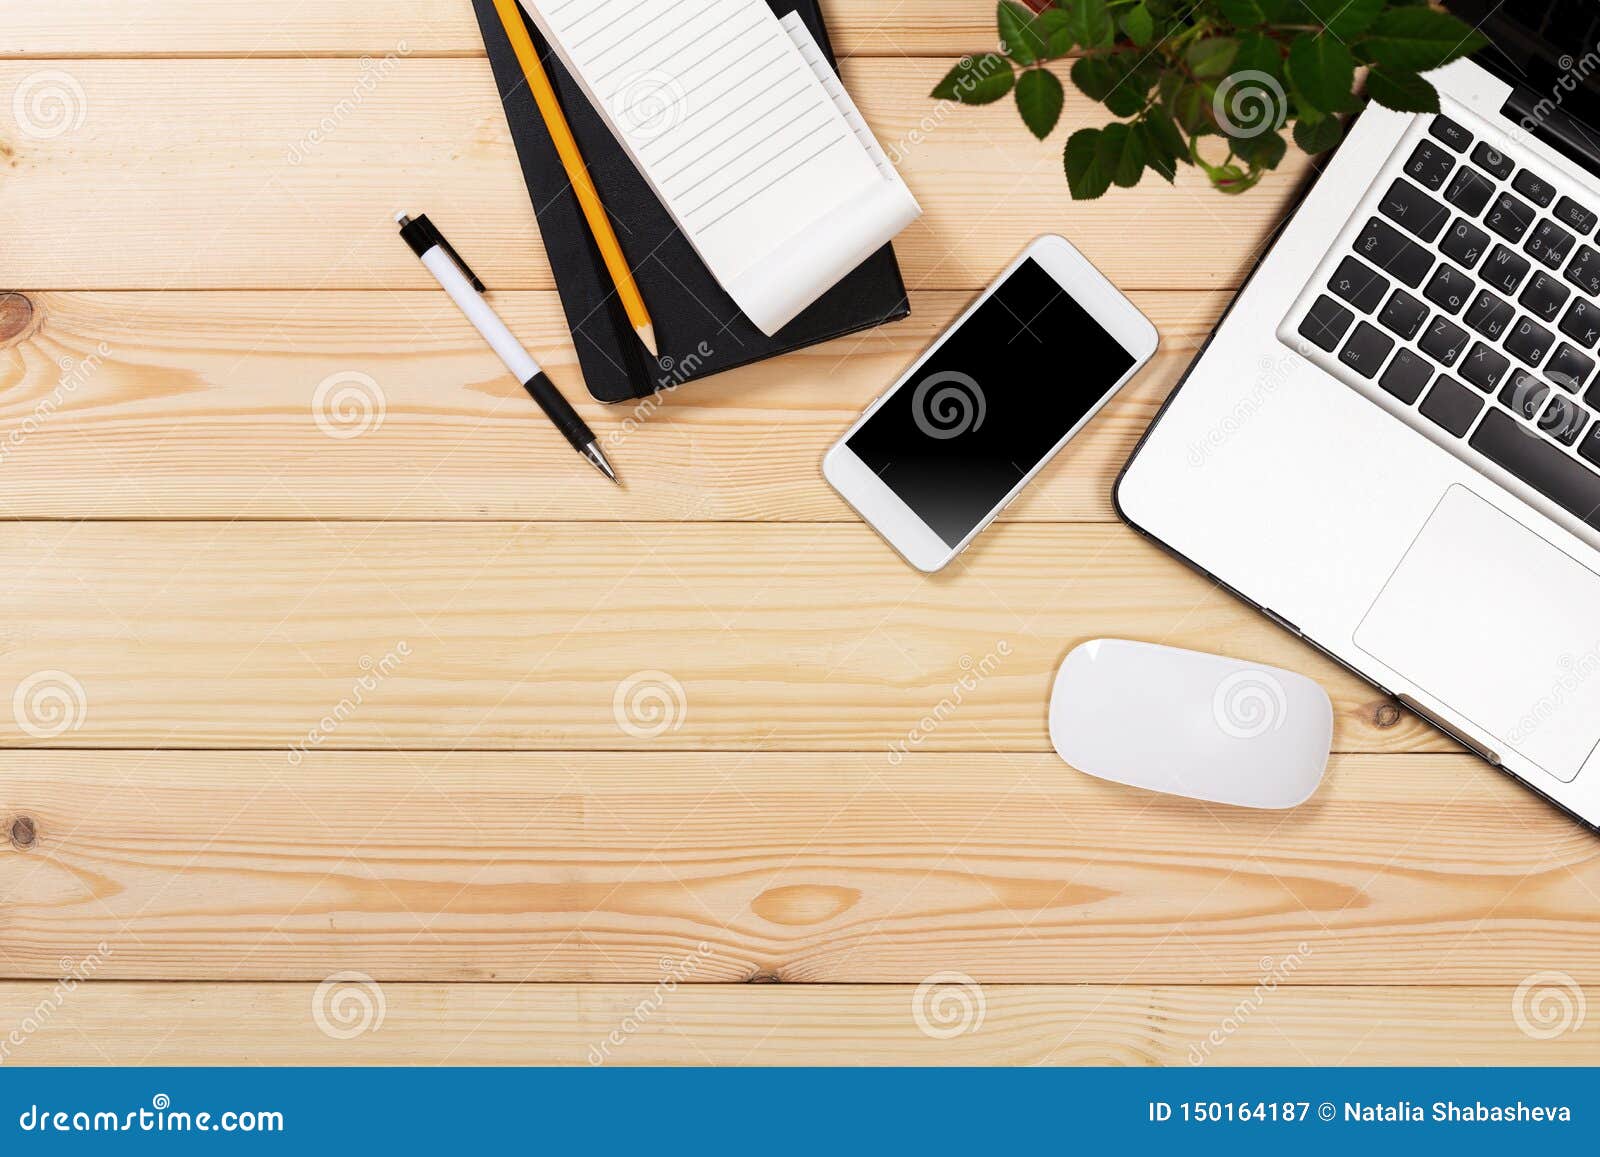 Working Space. Laptop, Notepad on Wooden Desk Stock Image - Image of